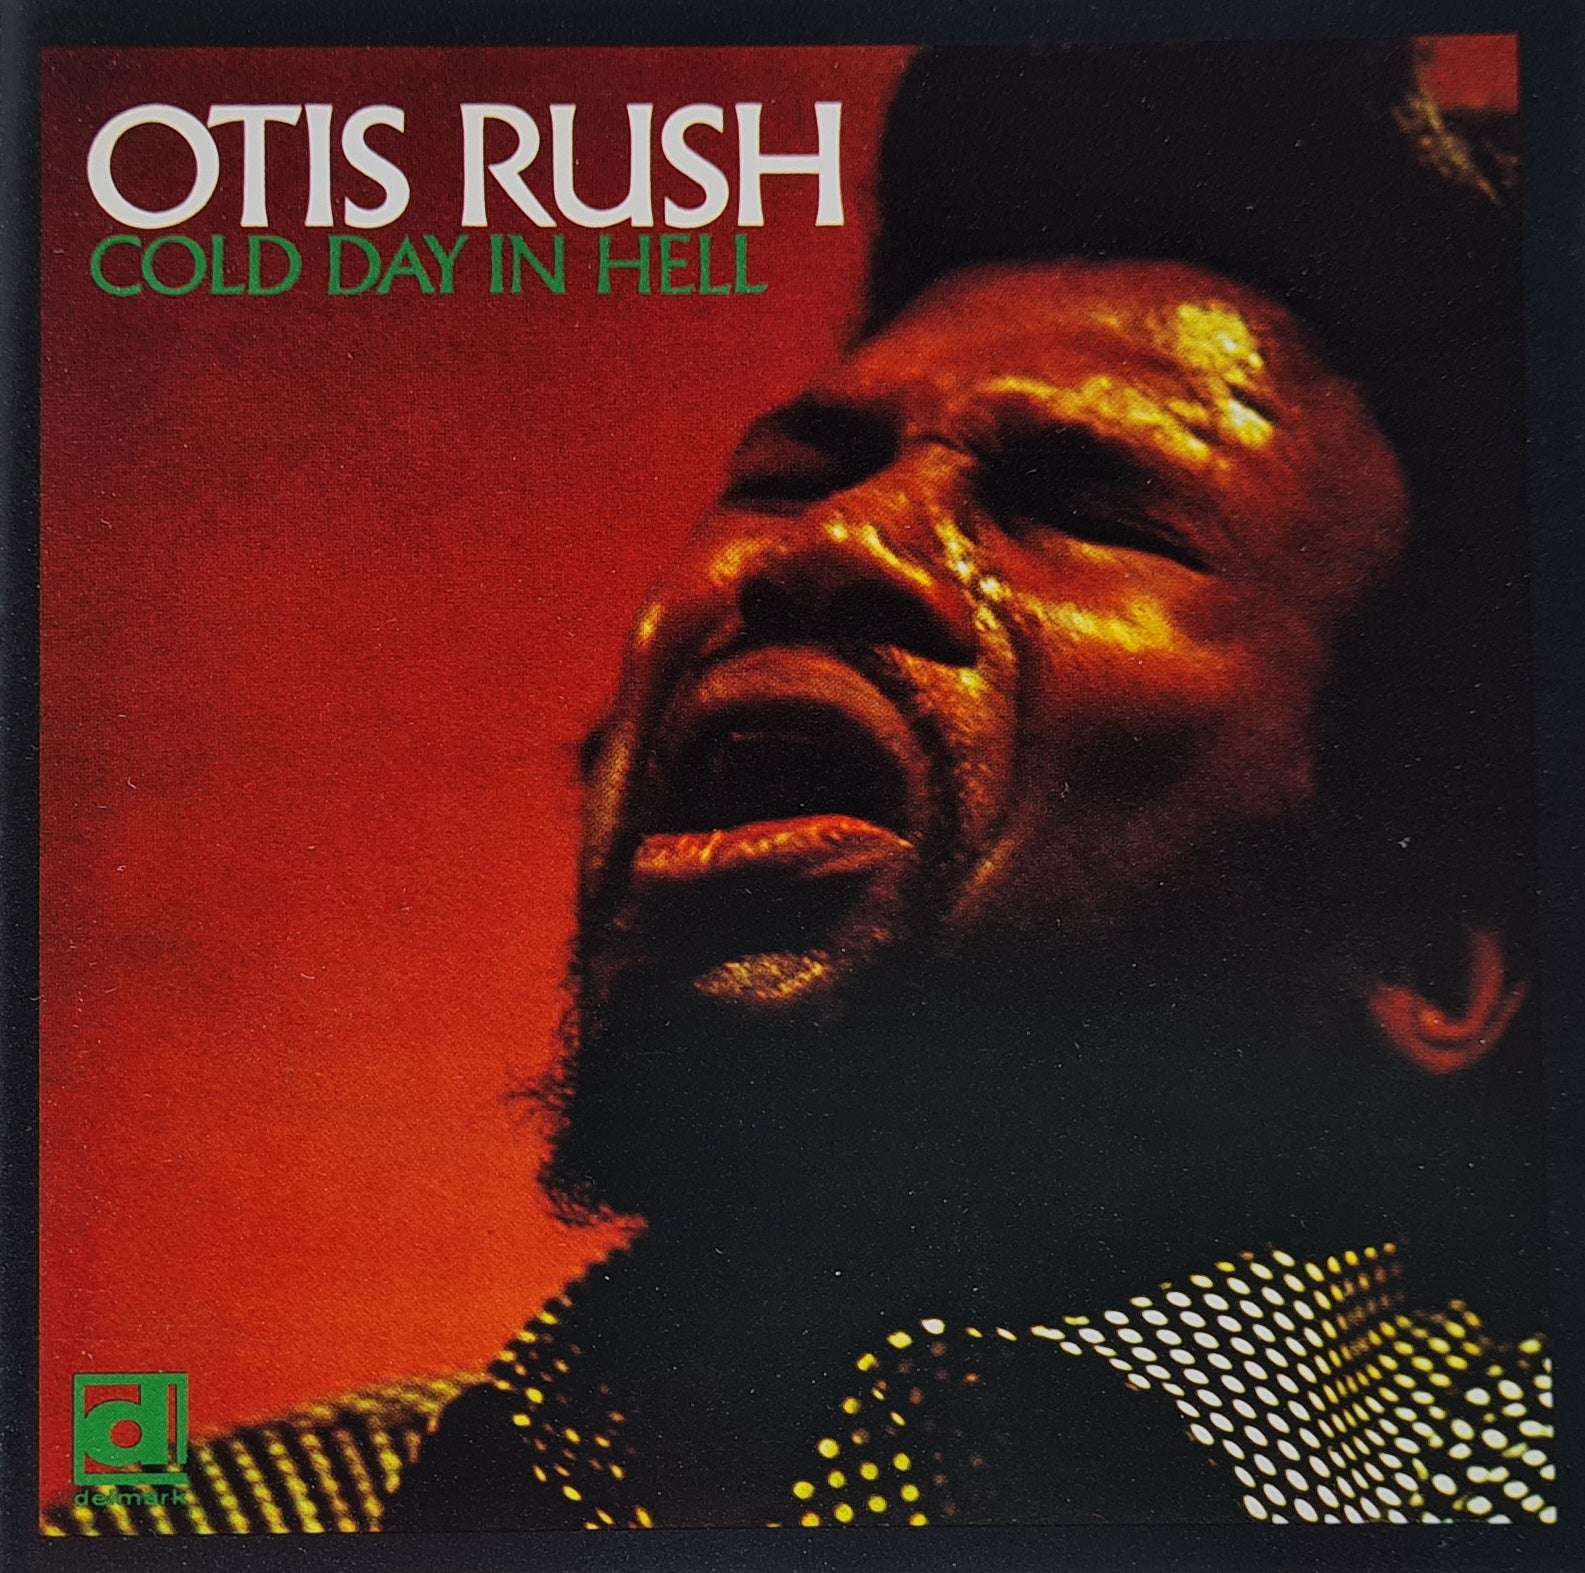 Otis Rush - Cold Day in Hell (CD)